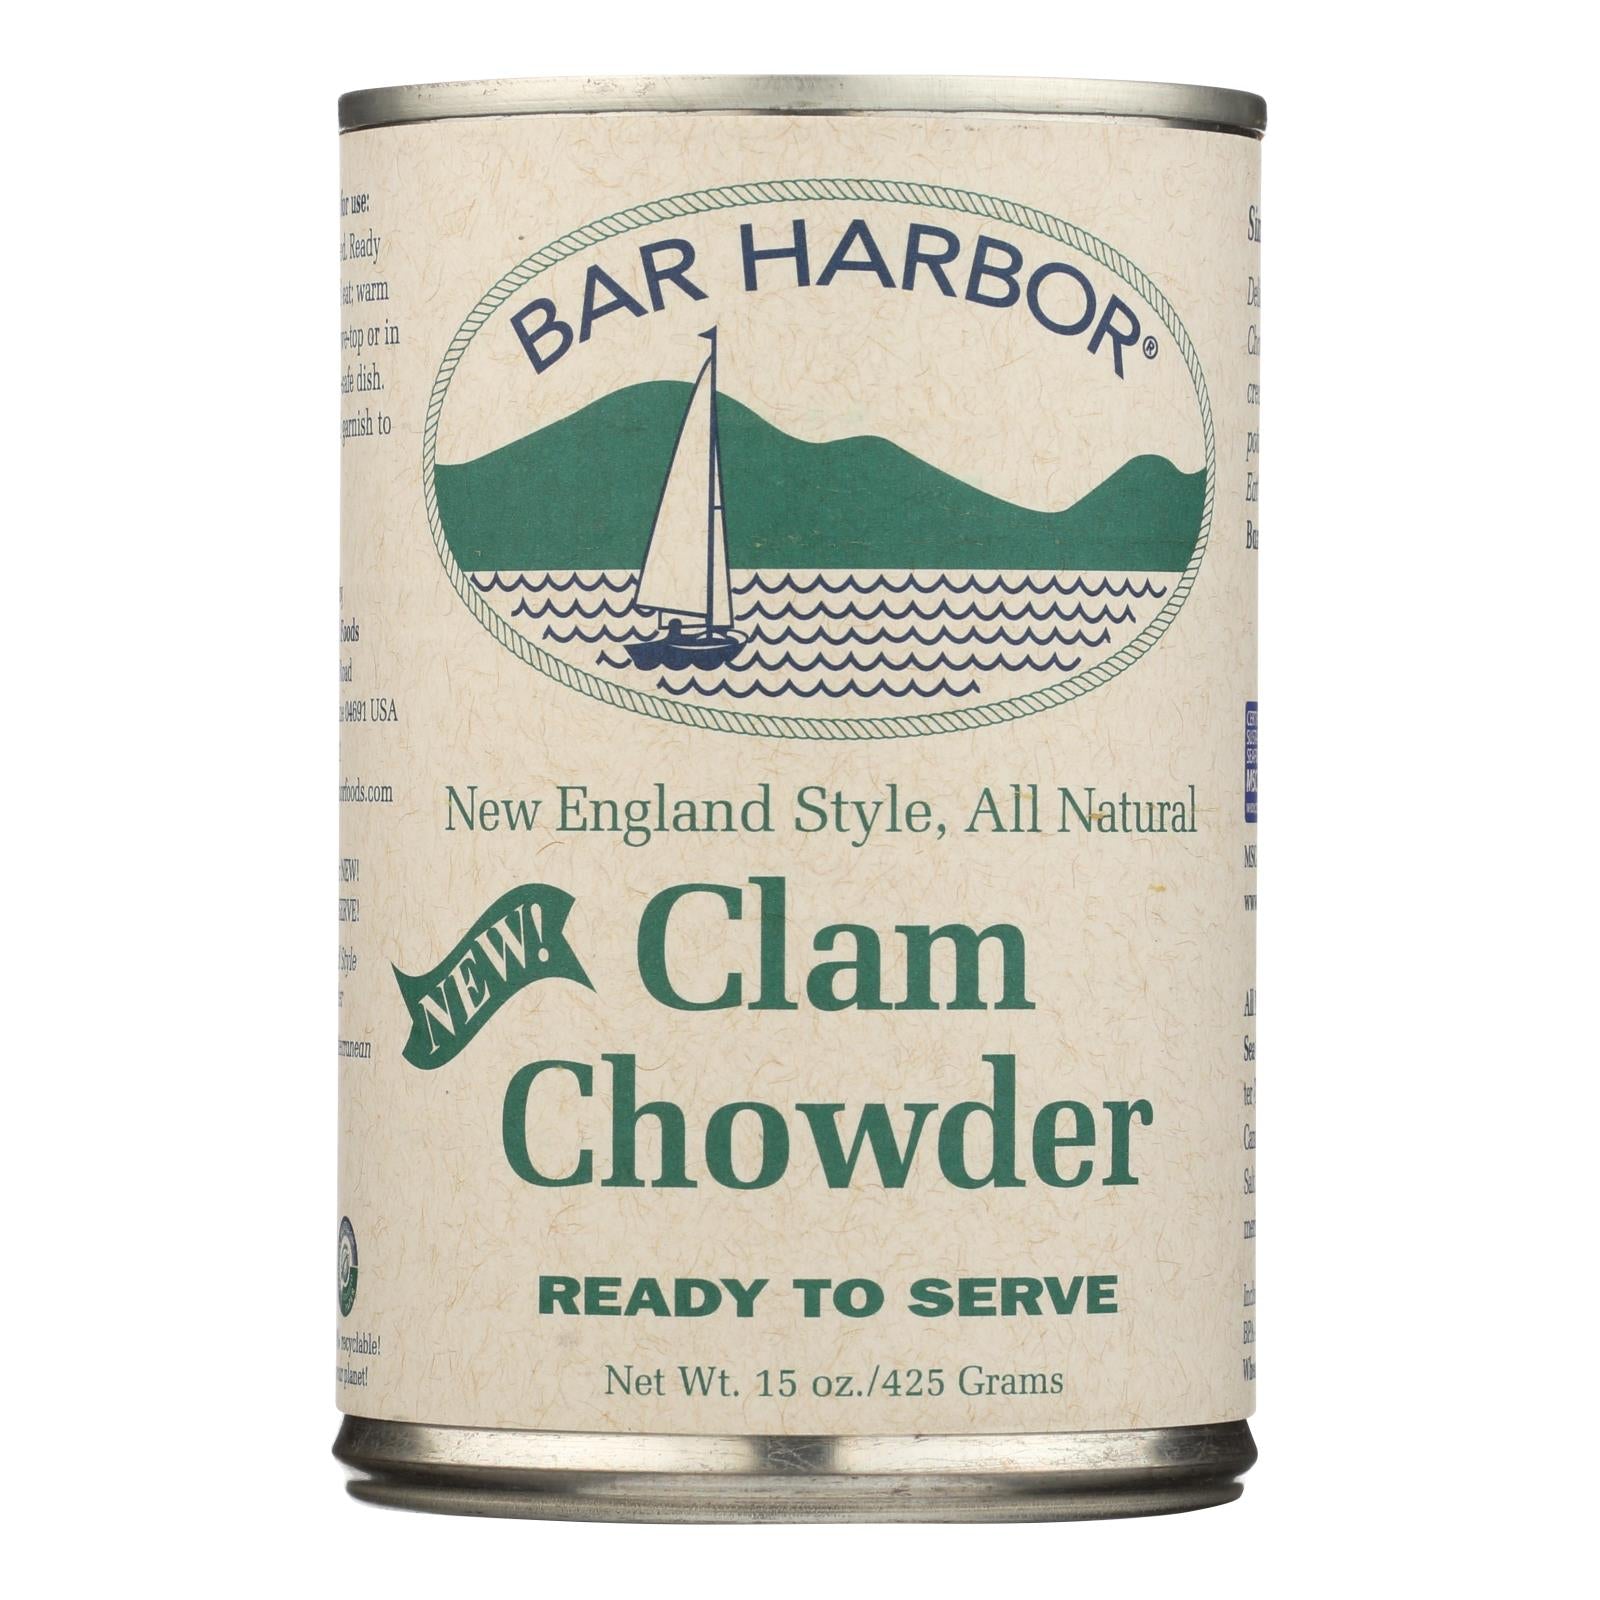 Bar Harbor, Bar Harbor - Clam Chowder - Ready to Serve - Case of 6-15 oz. (Pack of 6)